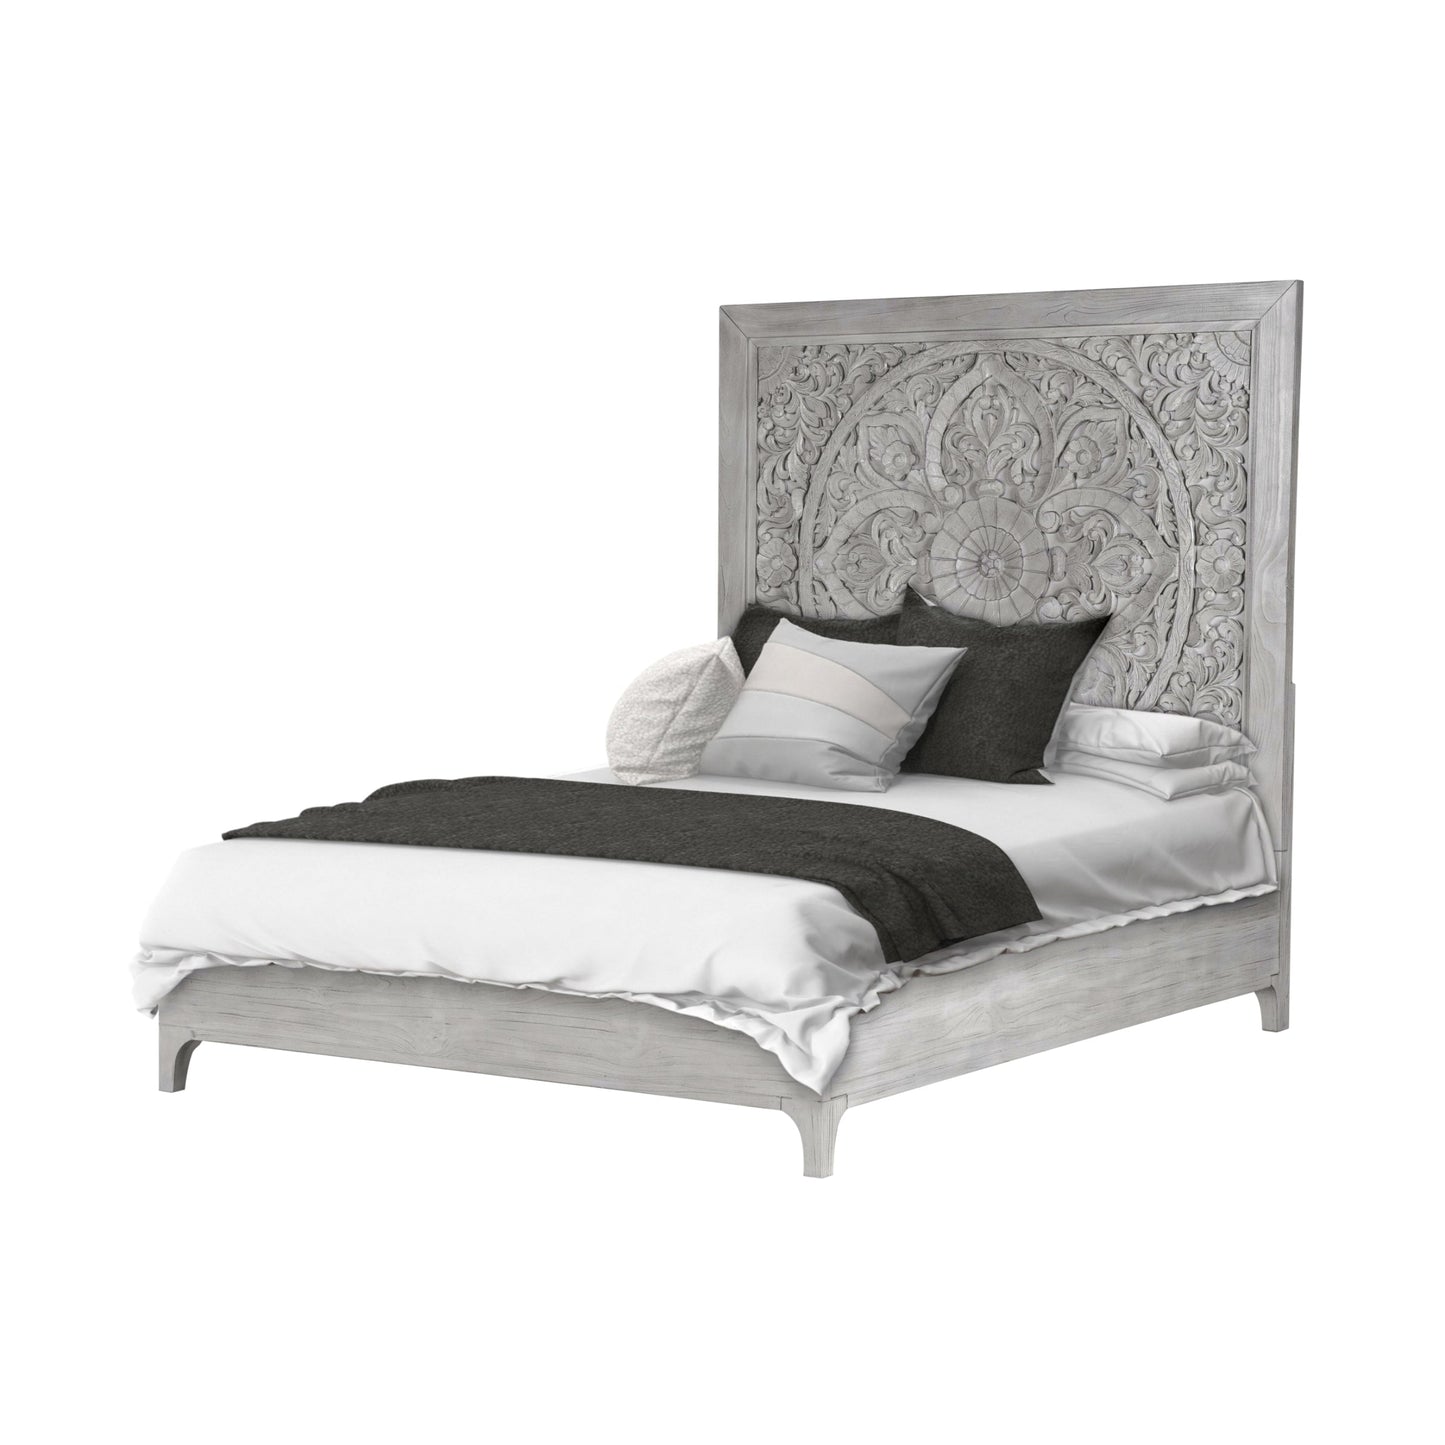 Modus Boho Chic 5PC Queen Bedroom Set w Chest in Washed White